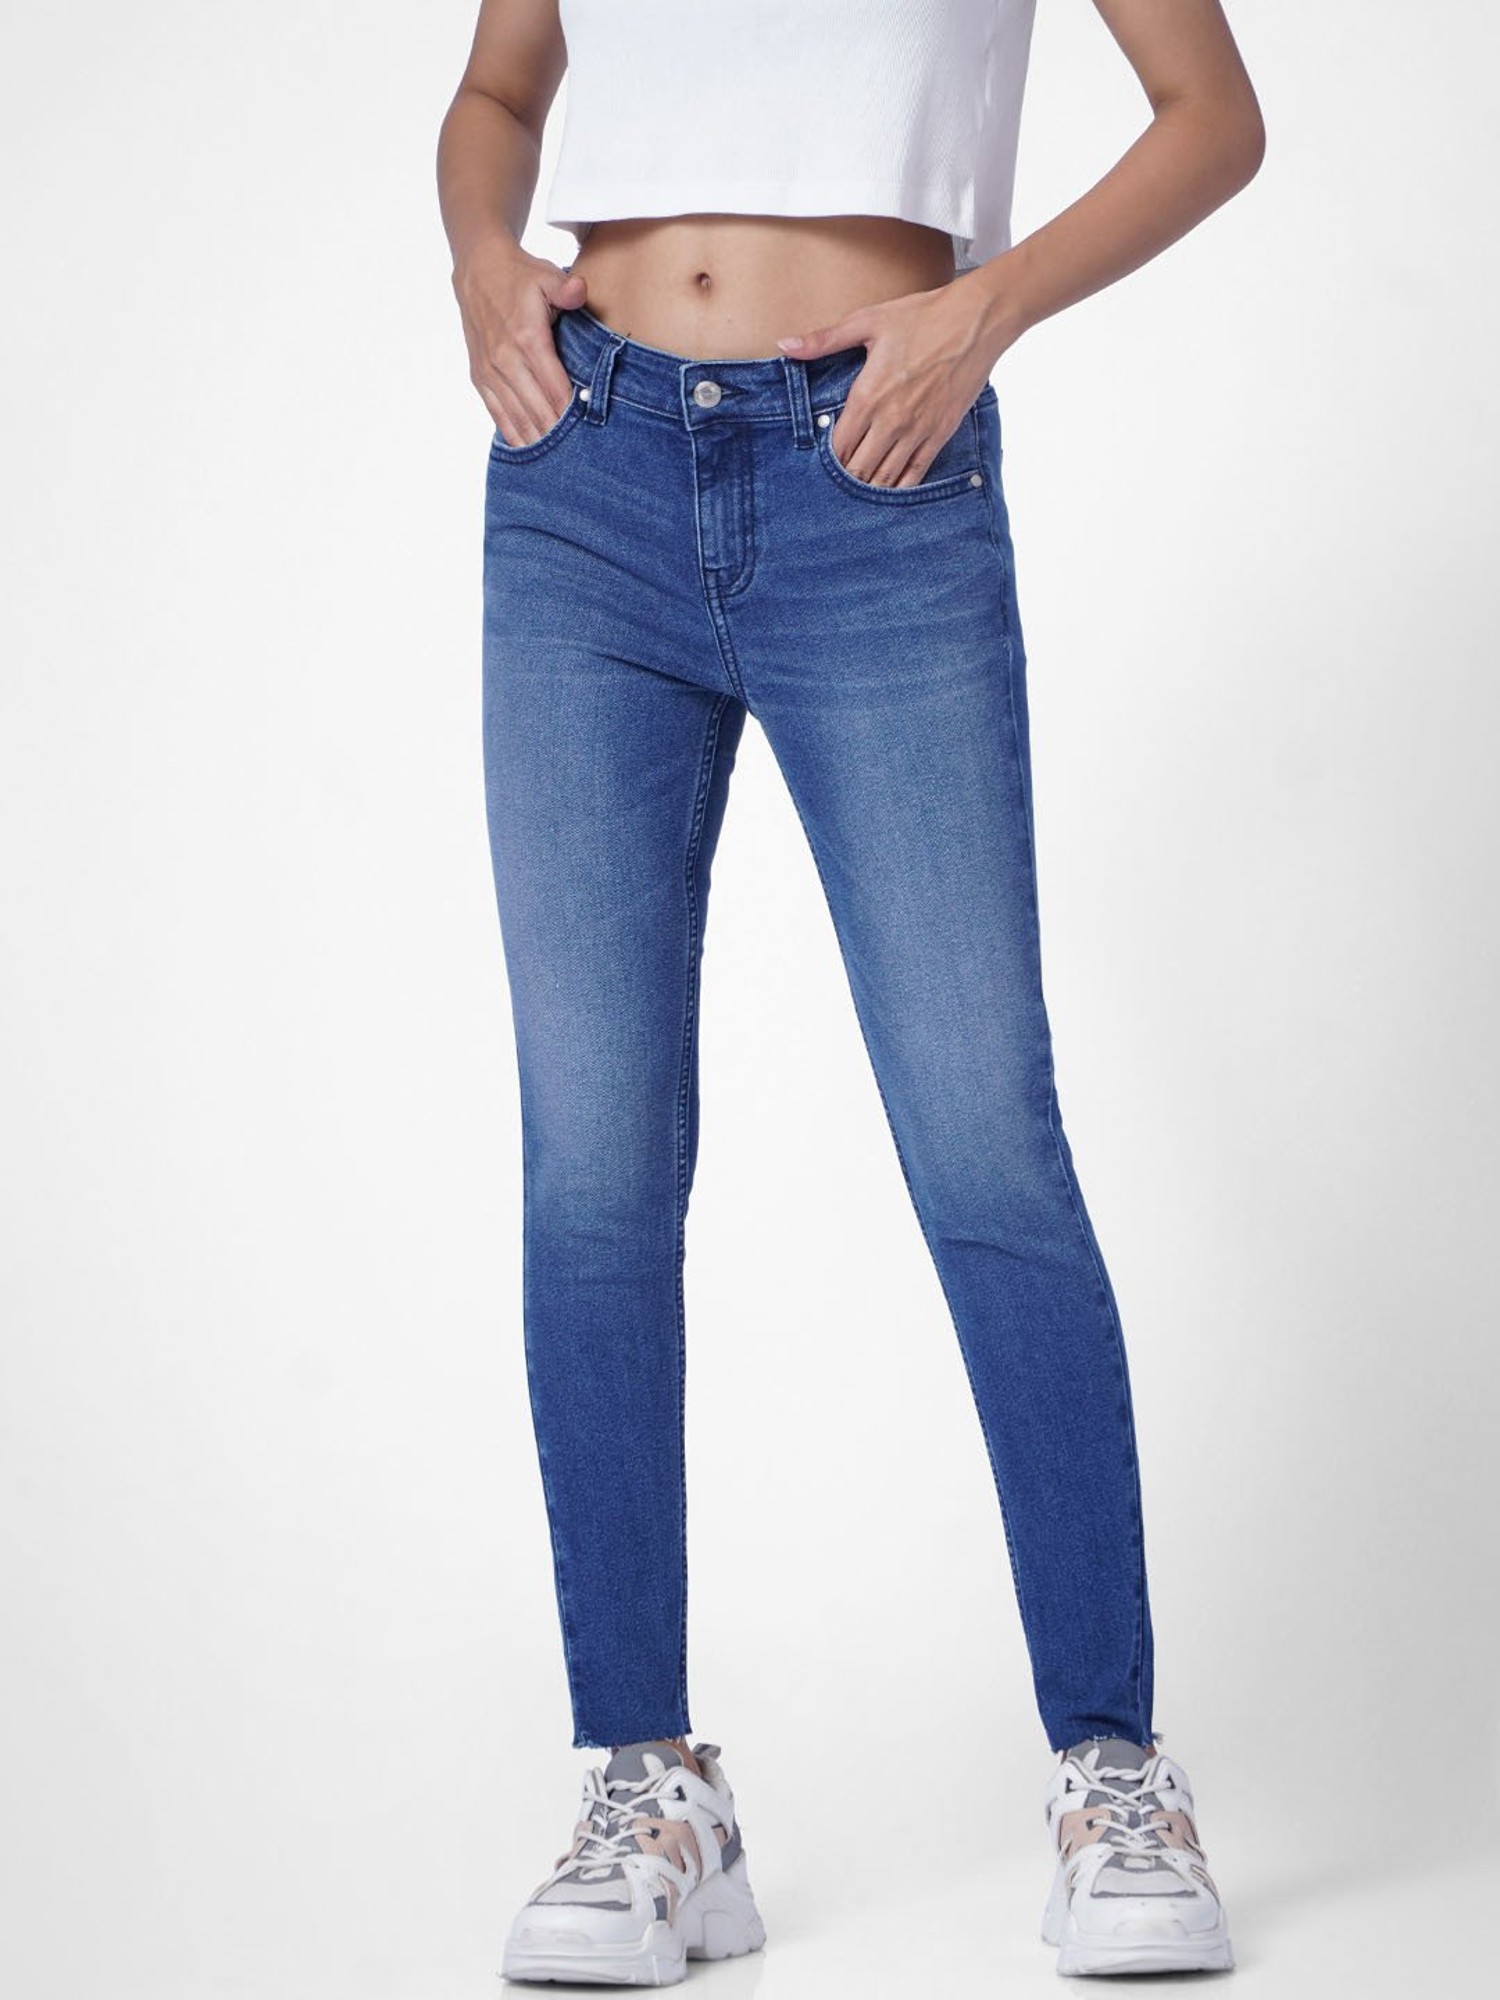 Skinny Light Blue Jeans - Buy Cute Outfits Light Blue Jeans – Onfire